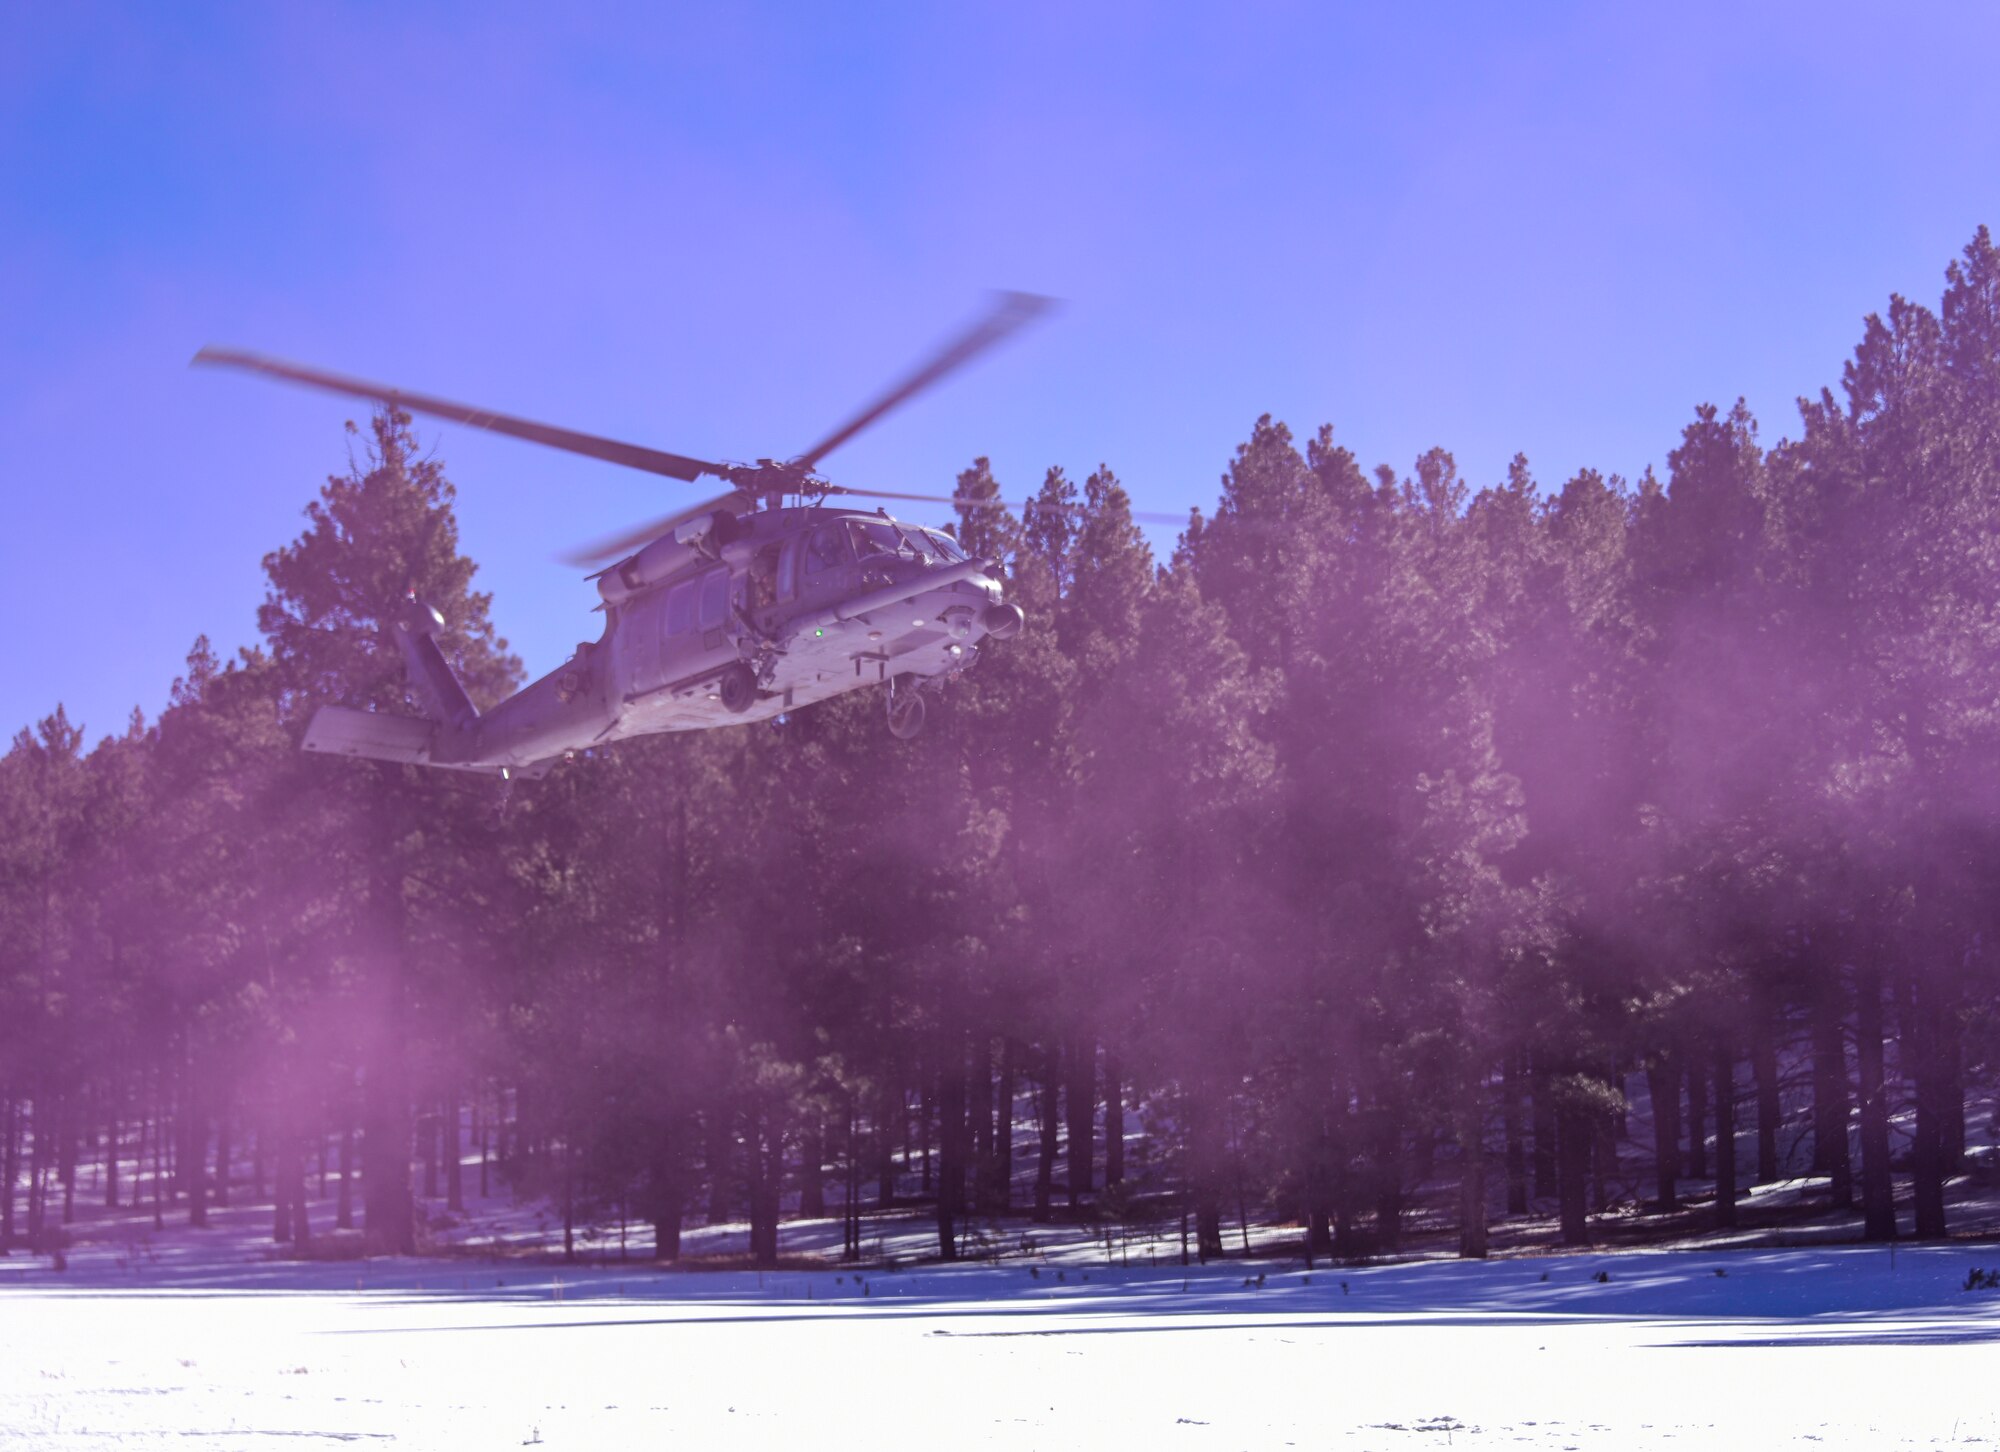 a photo of a helicopter landing in snow